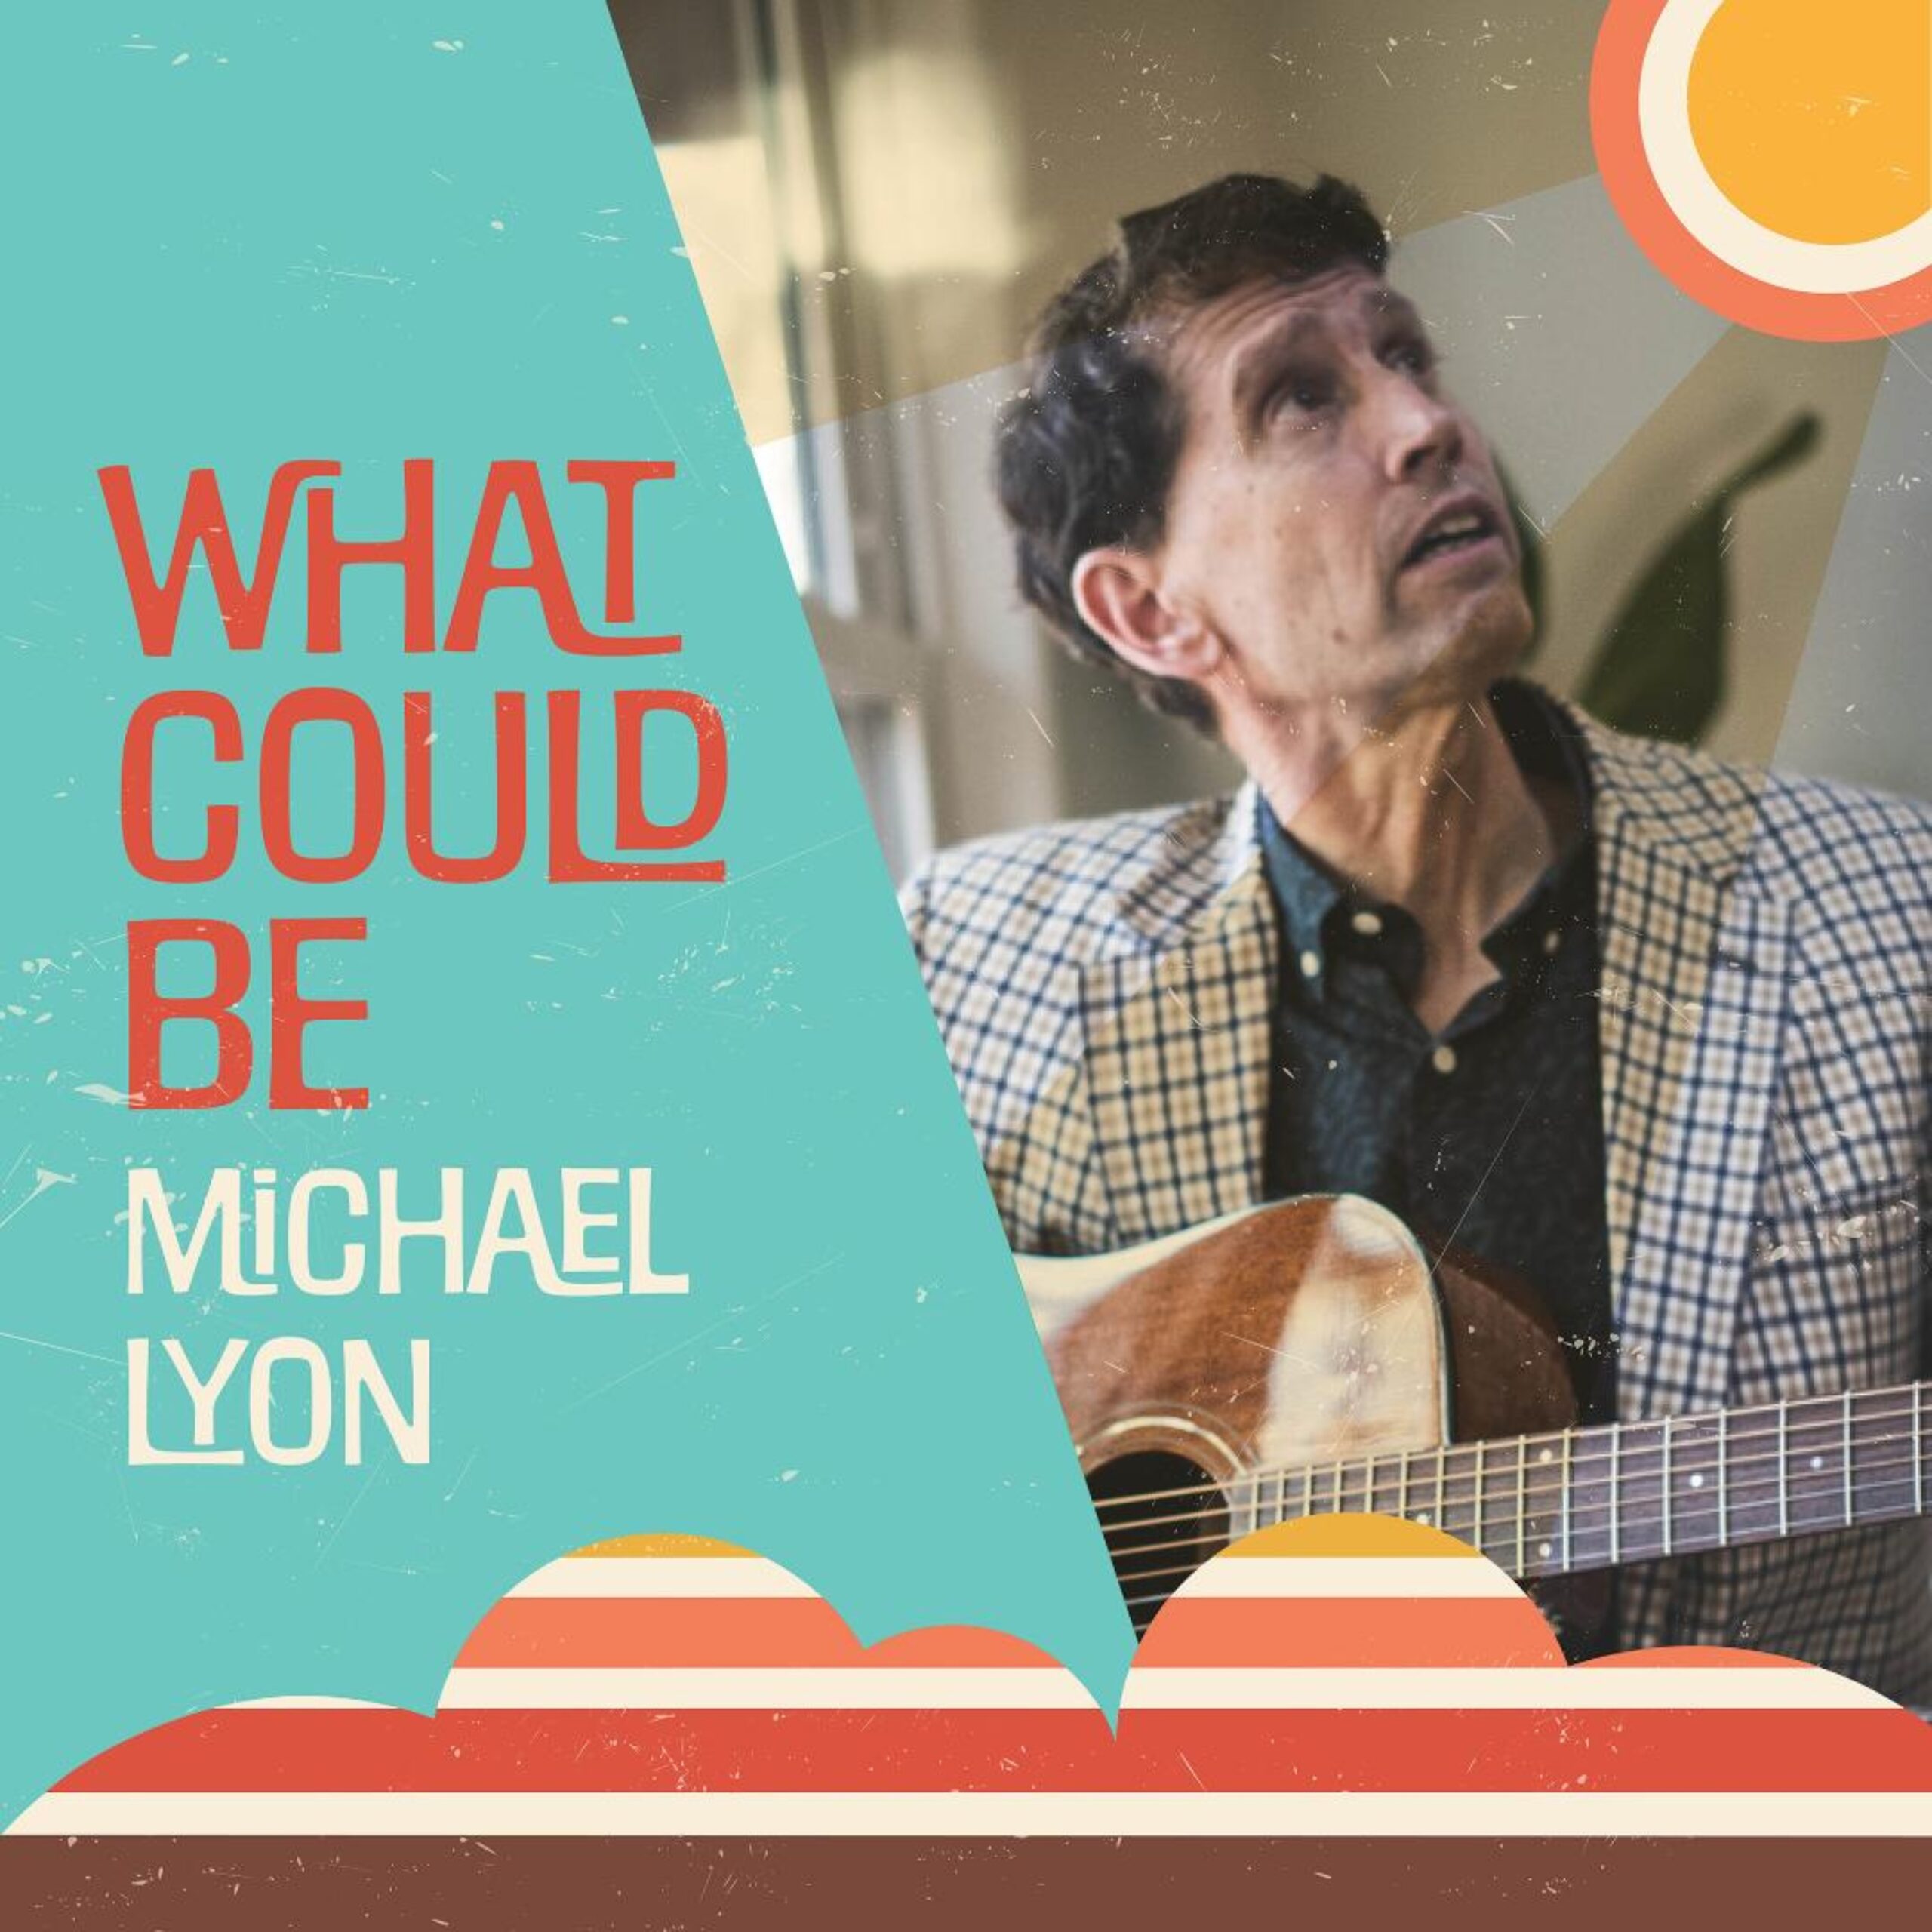 Michael Lyon’s “What Could Be”: An Artistic Exploration Across Life’s Phases